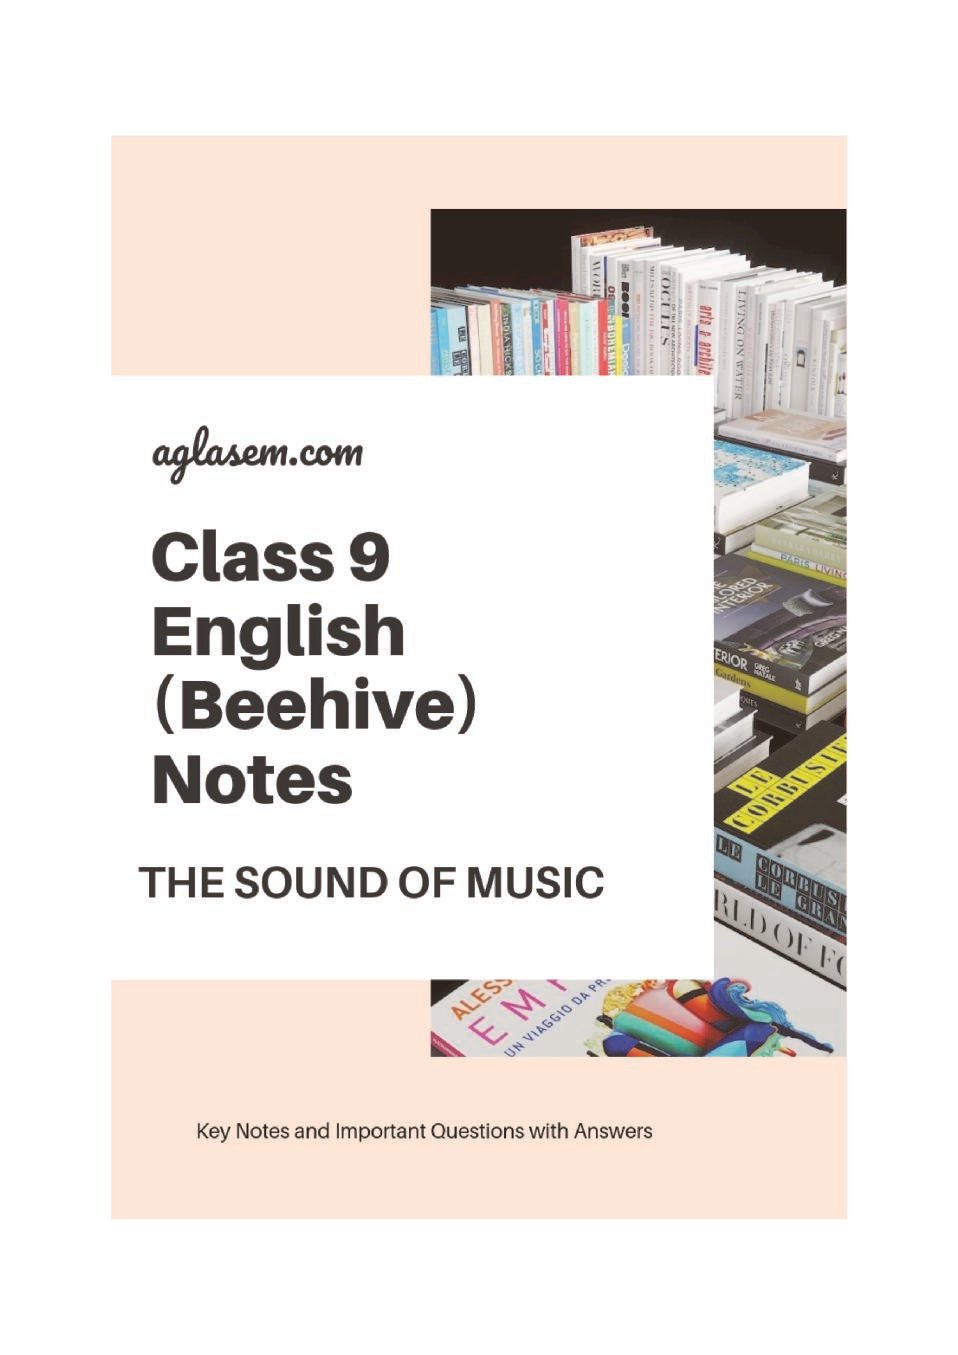 Class 9 English Beehive Notes For The Sound of Music - Page 1